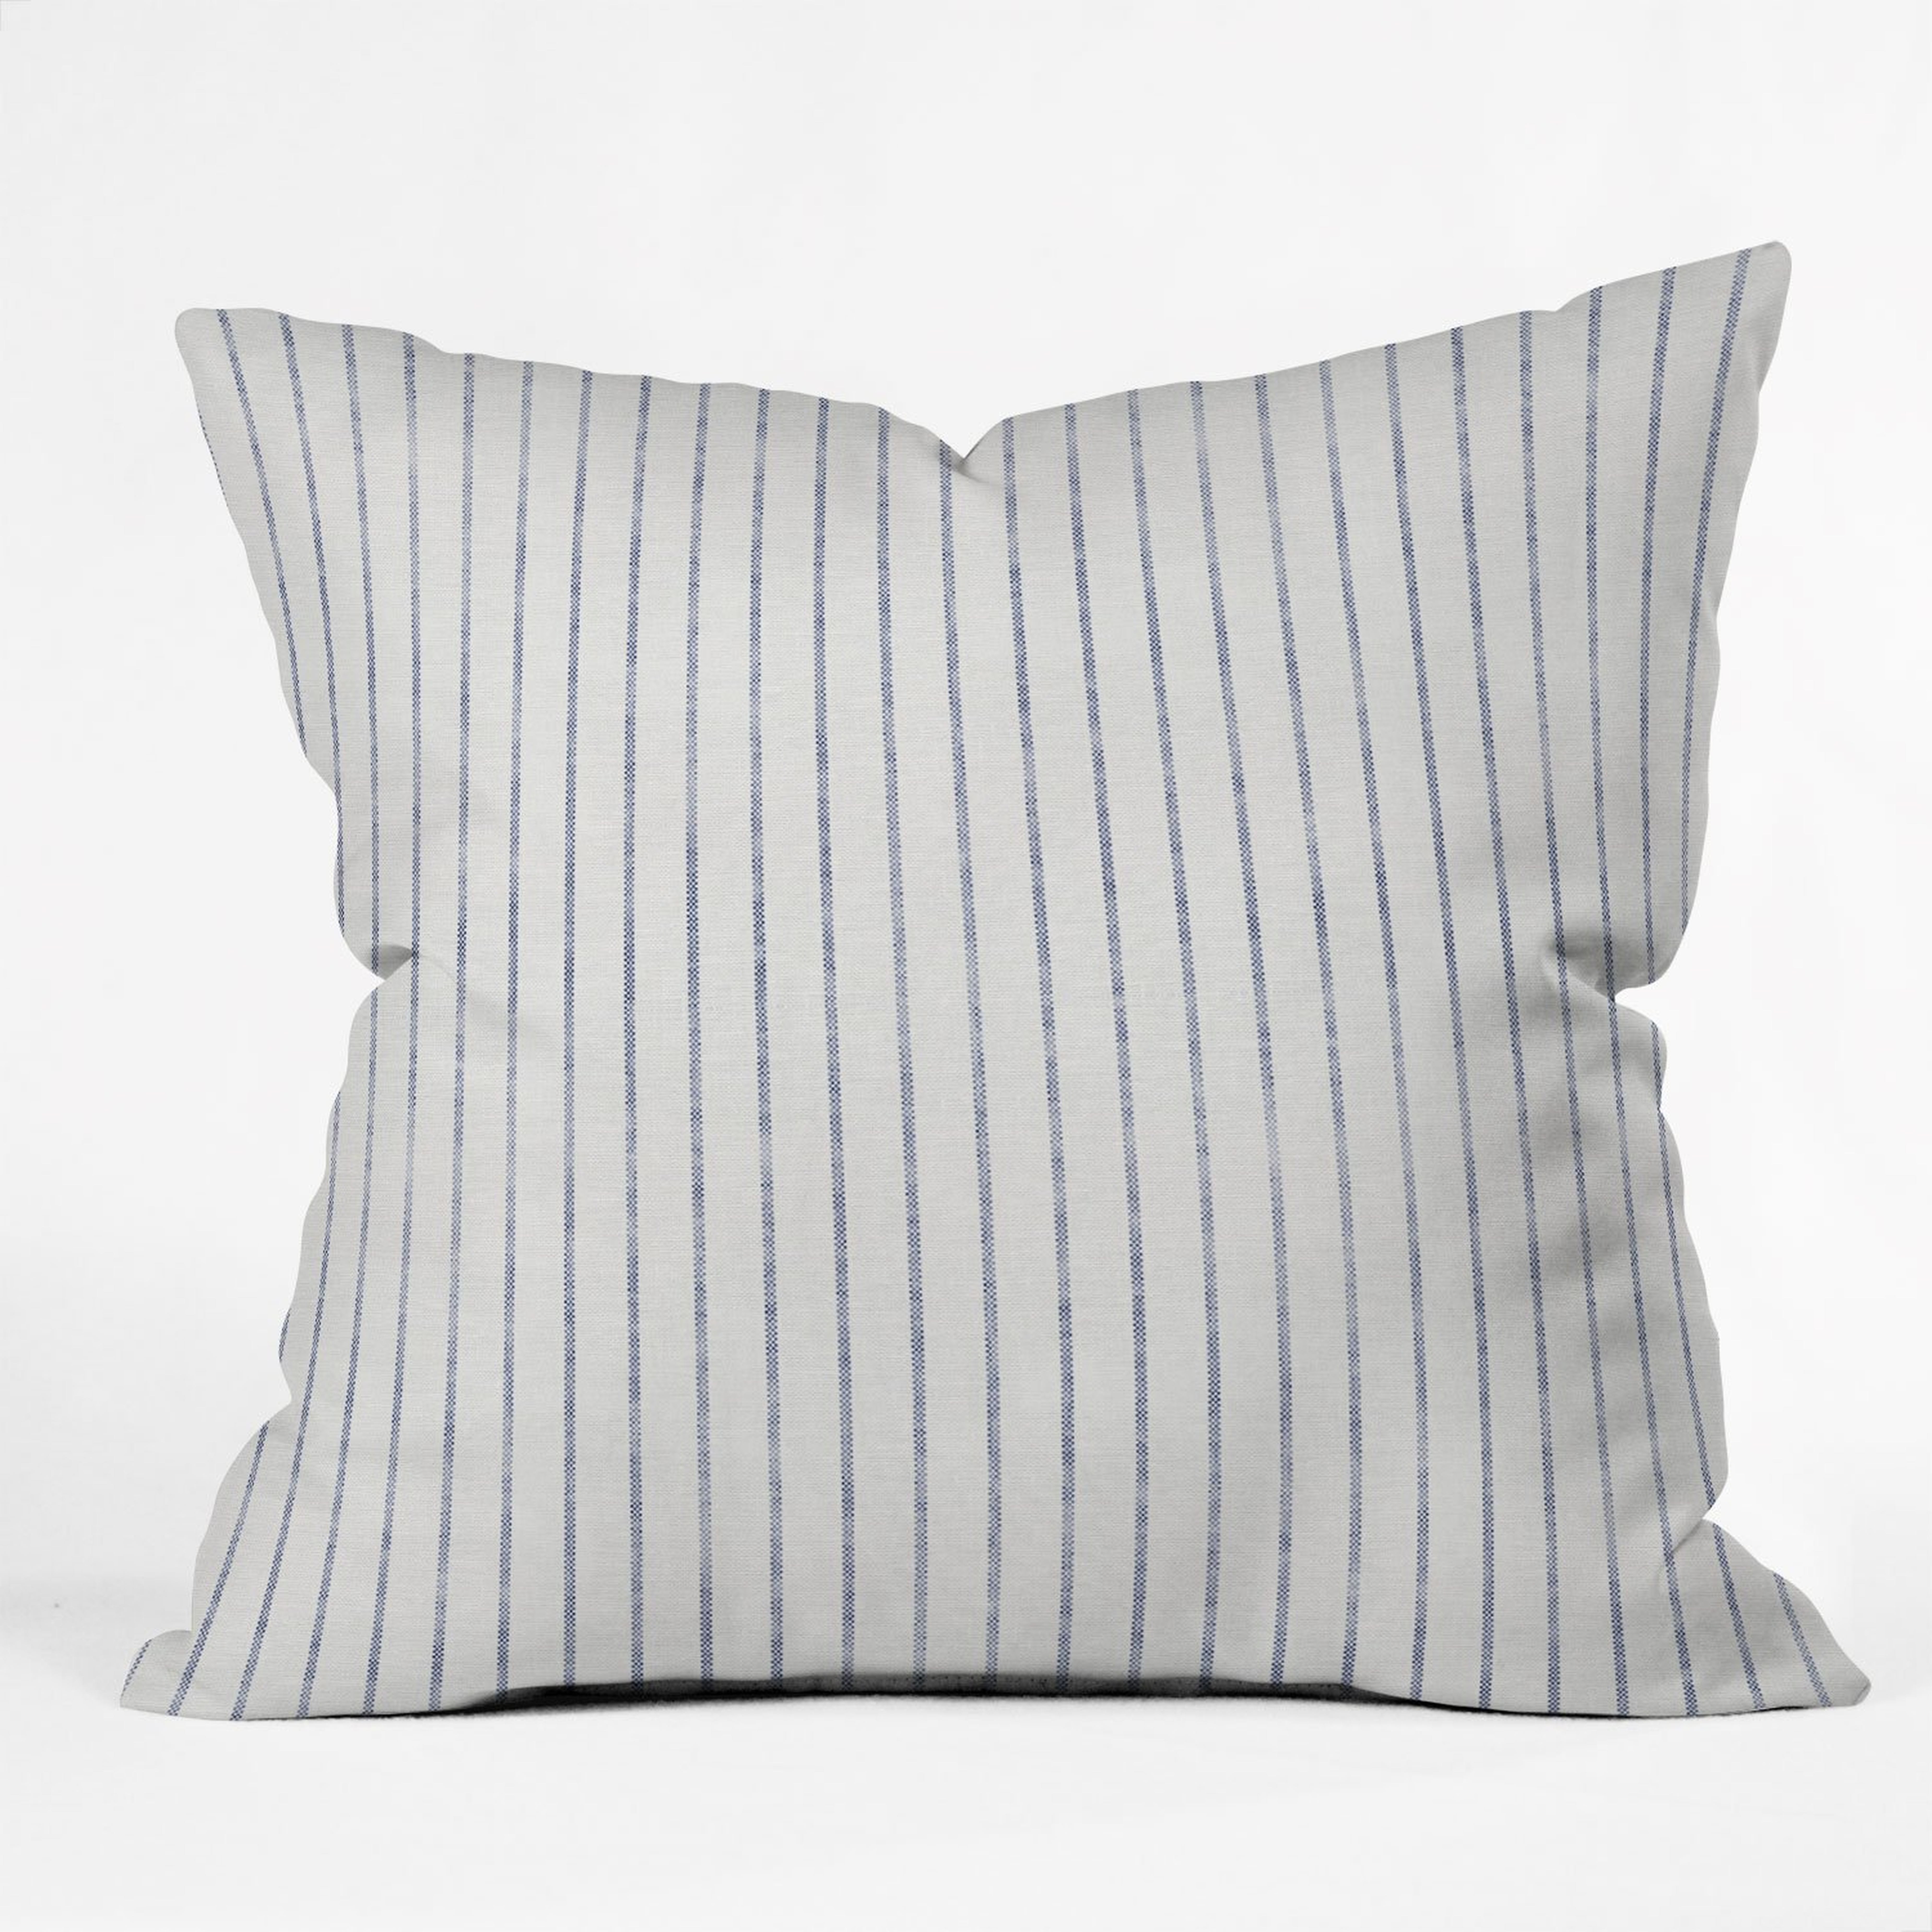 THROW PILLOW AEGEAN WIDE STRIPE  BY HOLLI ZOLLINGER // 20" x 20" // Pillow Cover with Insert - Wander Print Co.